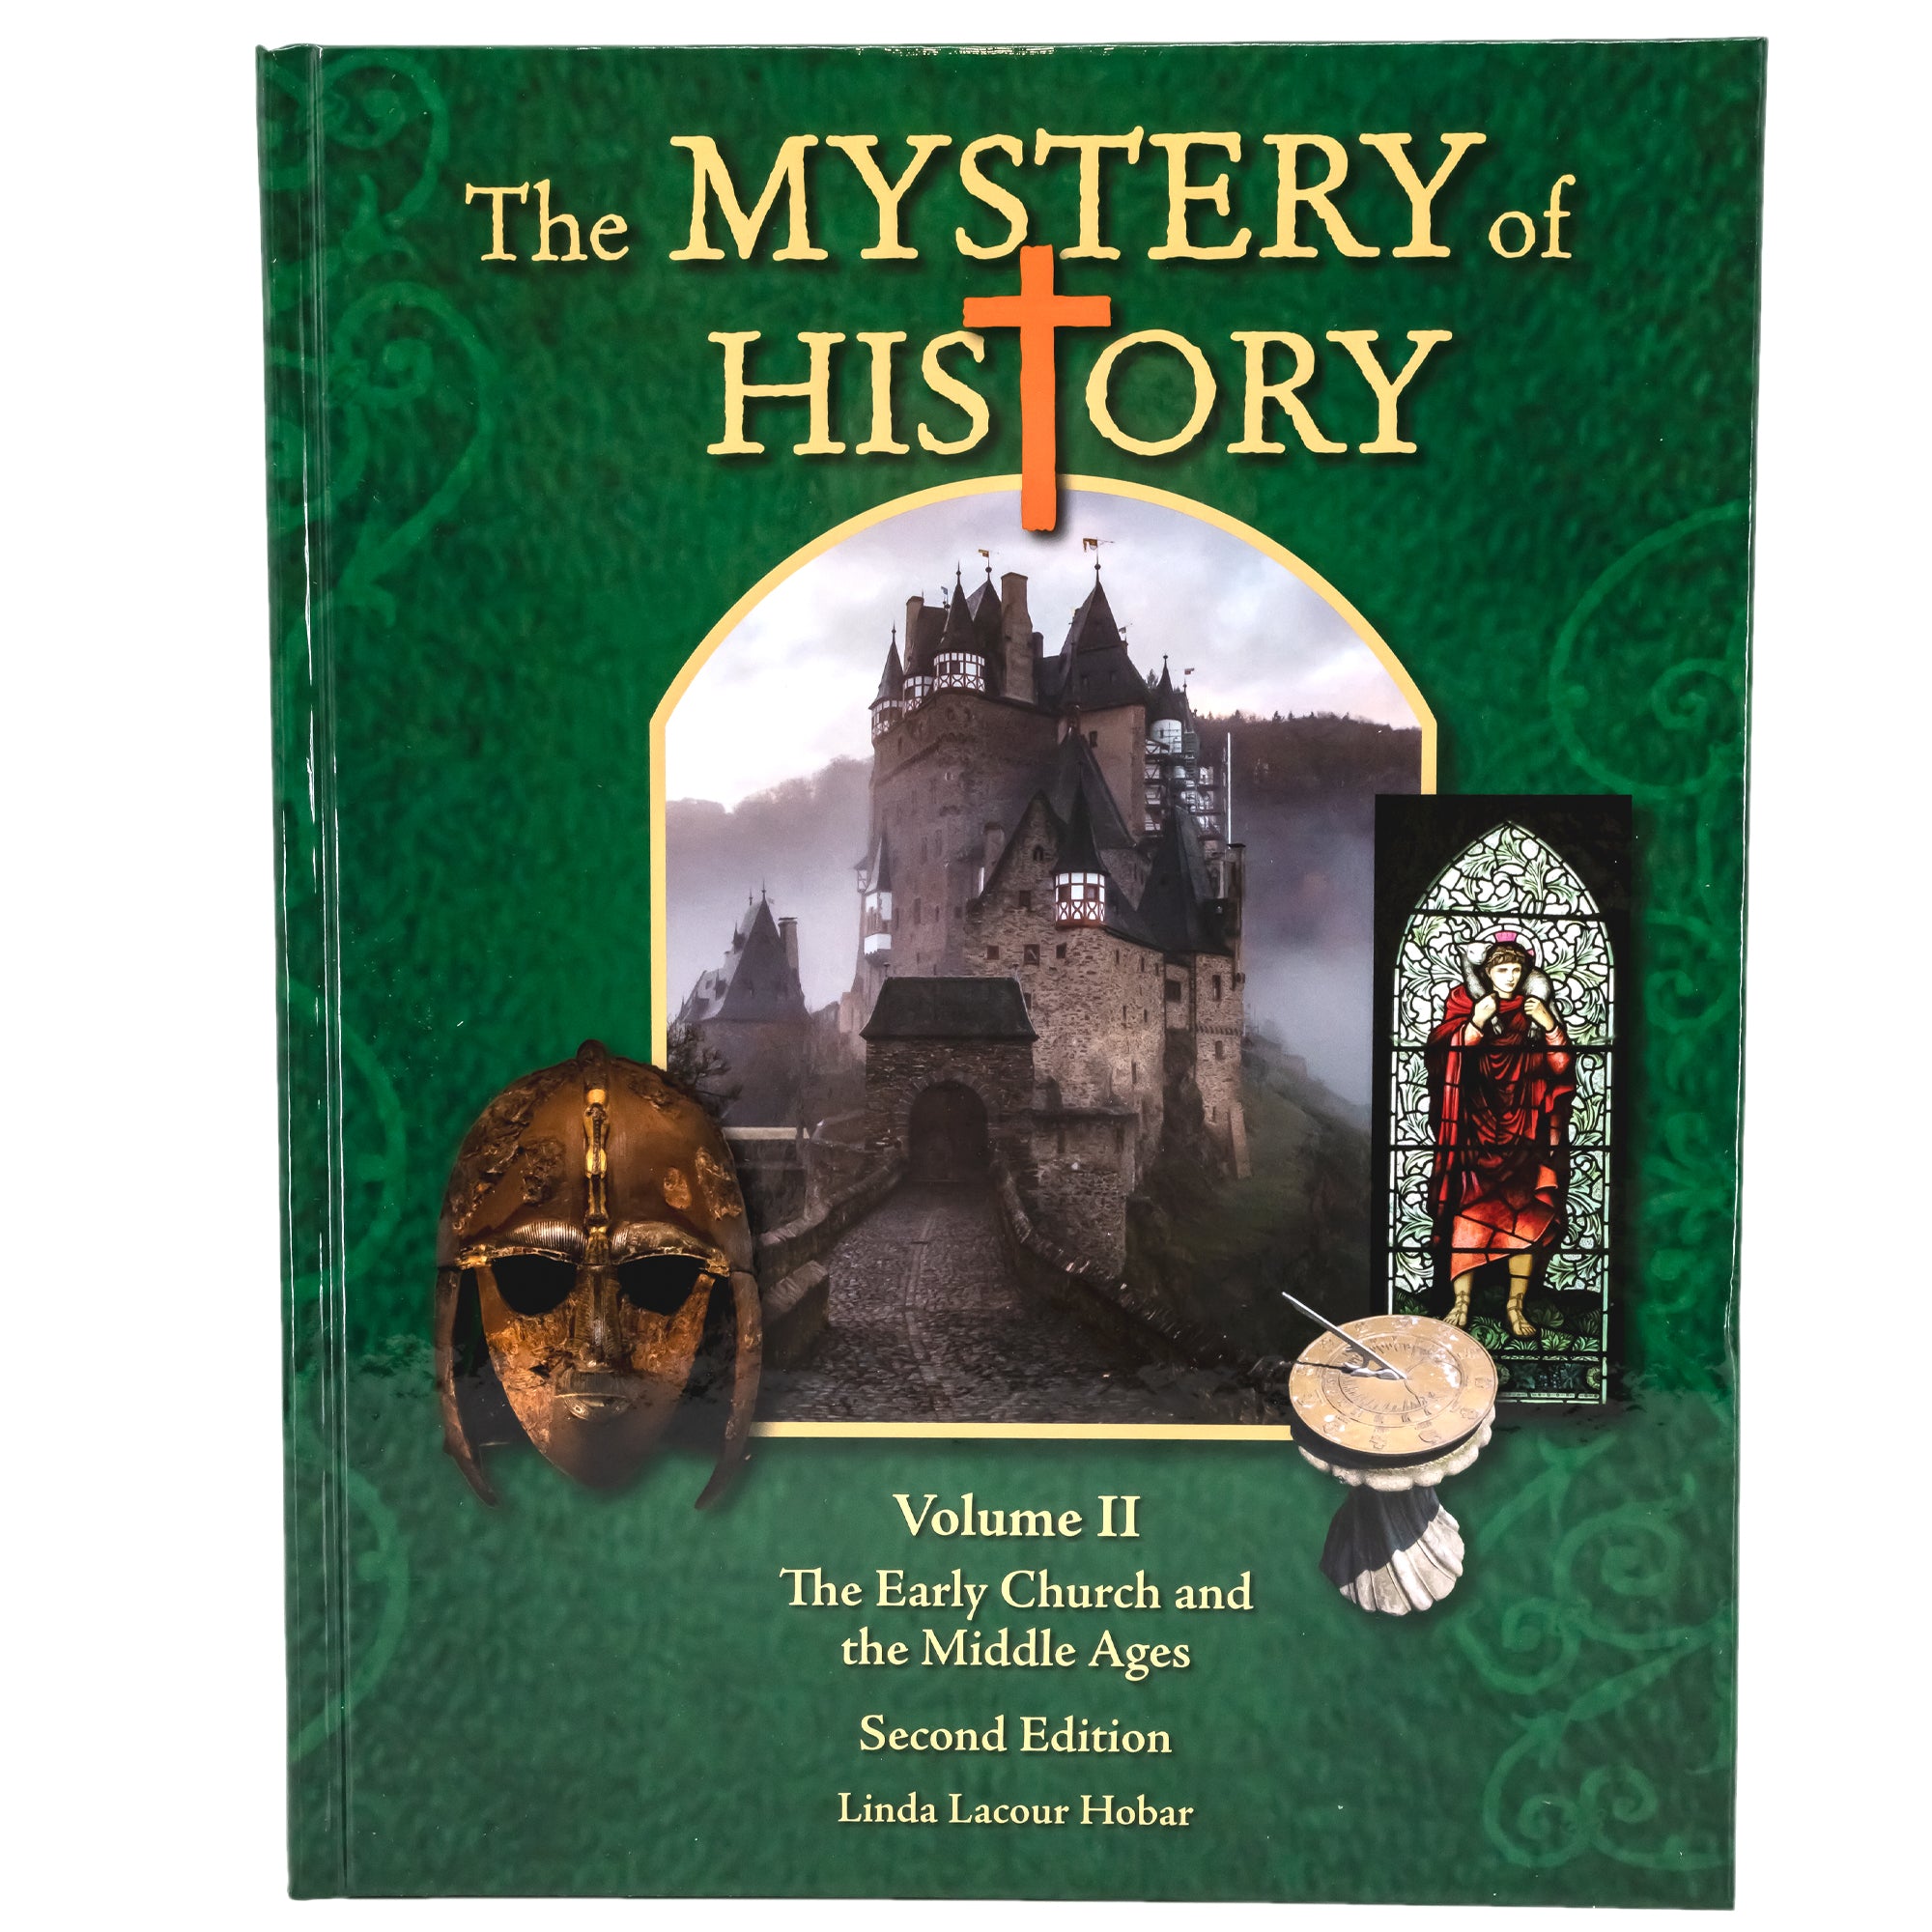 The Mystery of History volume 2 book cover. It is dark green colored with lighter swirls. In the middle is a framed photo of an old stone bricked castle. On the sides of the main photo are 3 images, including; an old metal war mask with holes cutout for eyes, a tall stone sundial, and a stained glass window of a Sheppard in a red robe holding a lamb over his shoulders.